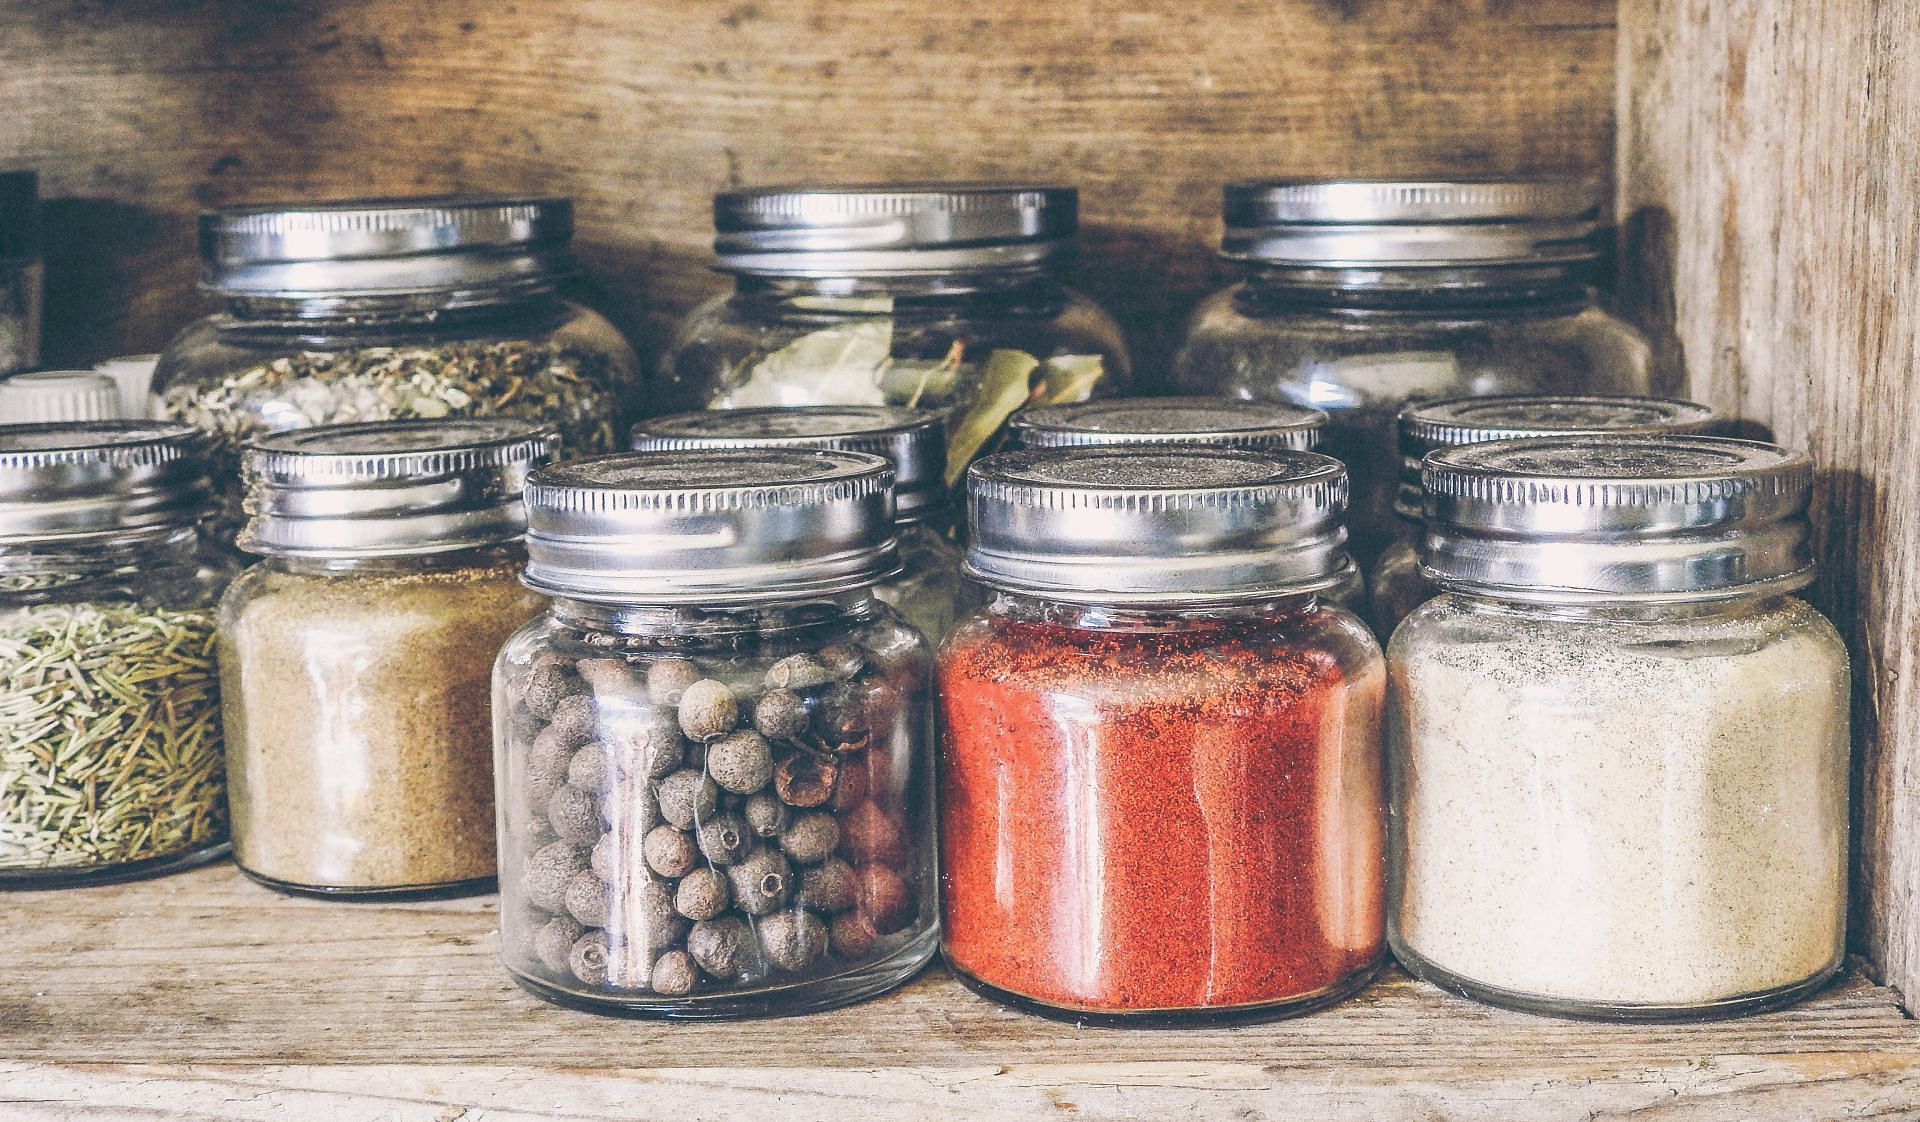 8 tips to reduce sodium intake from your diet (image sourced via Pexels / Photo by monicore)